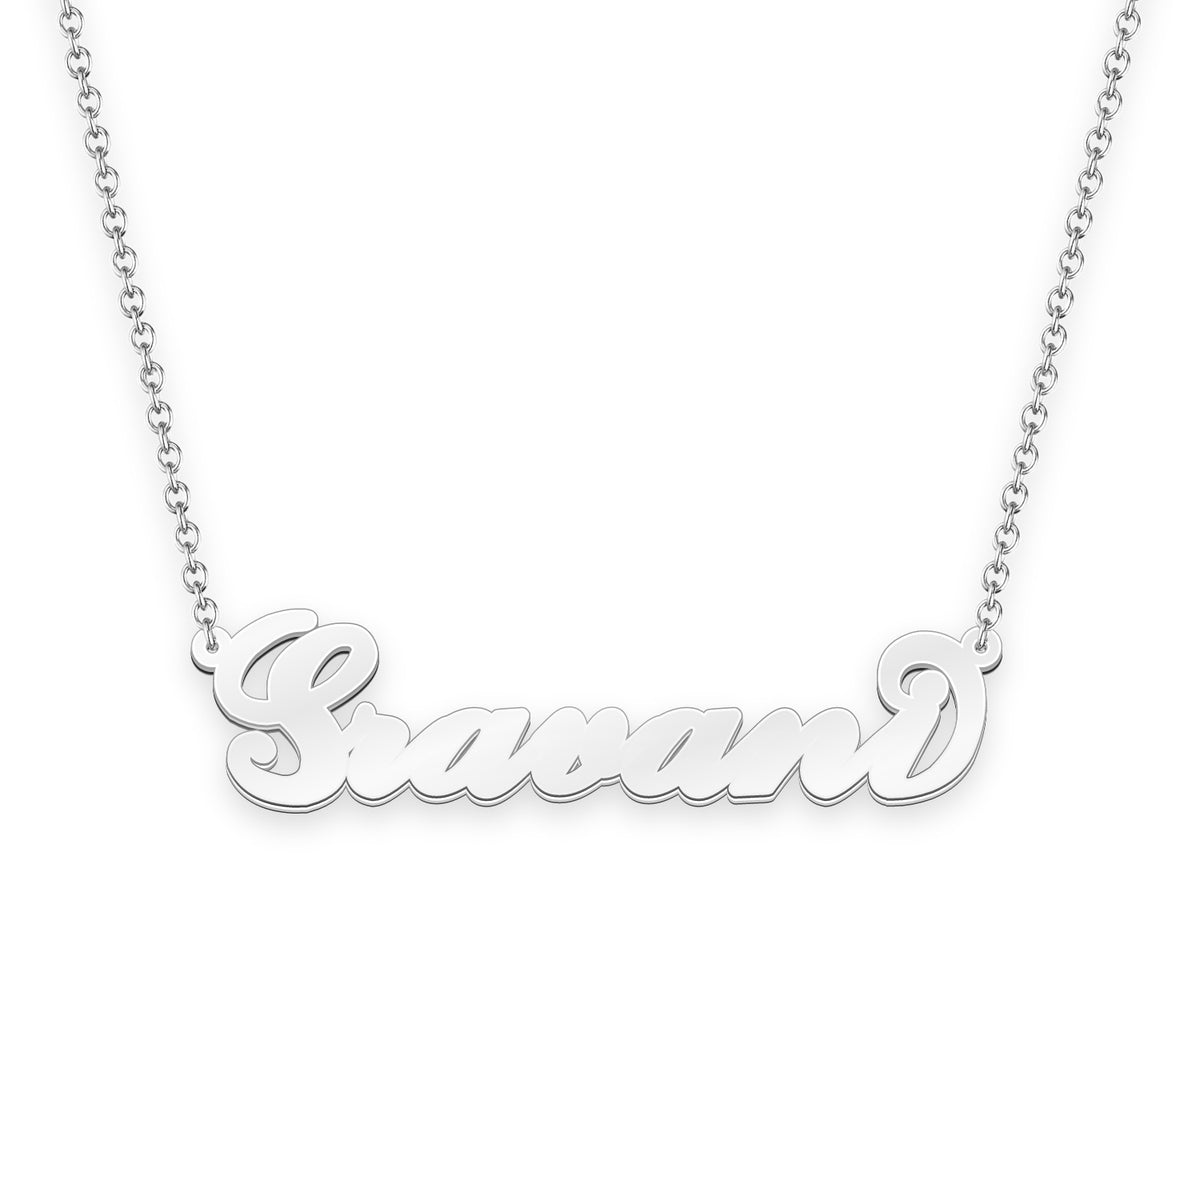 Sravani name necklace Gold Custom Necklace, Personalized Gifts For ...